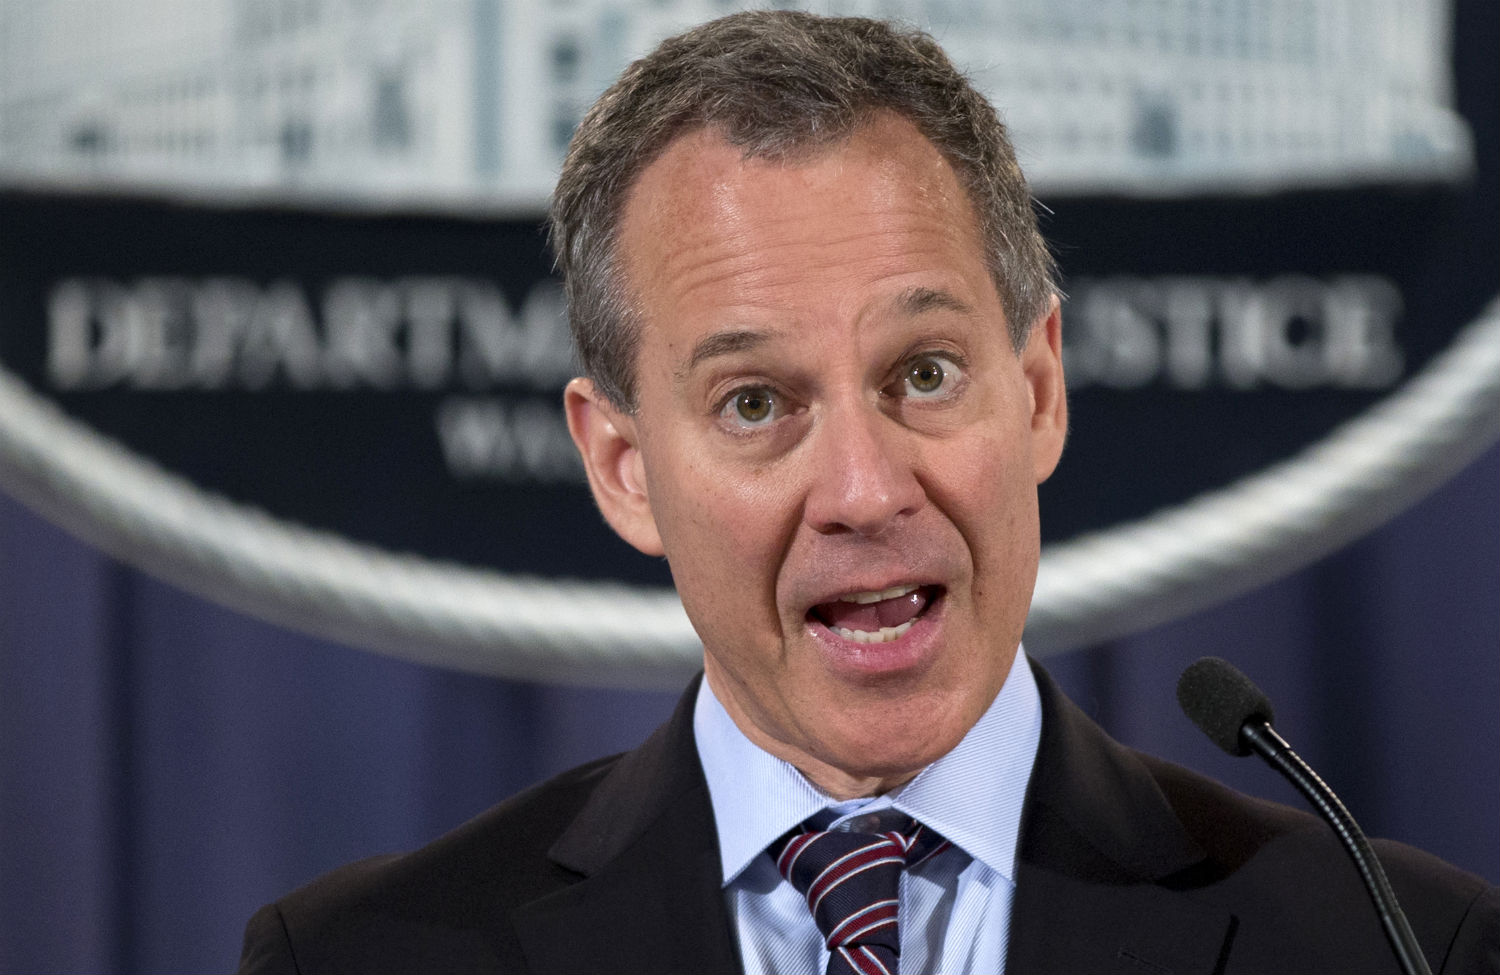 Cuomo v. Schneiderman: Will the JPMorgan Settlement Actually Help New York’s Homeowners?